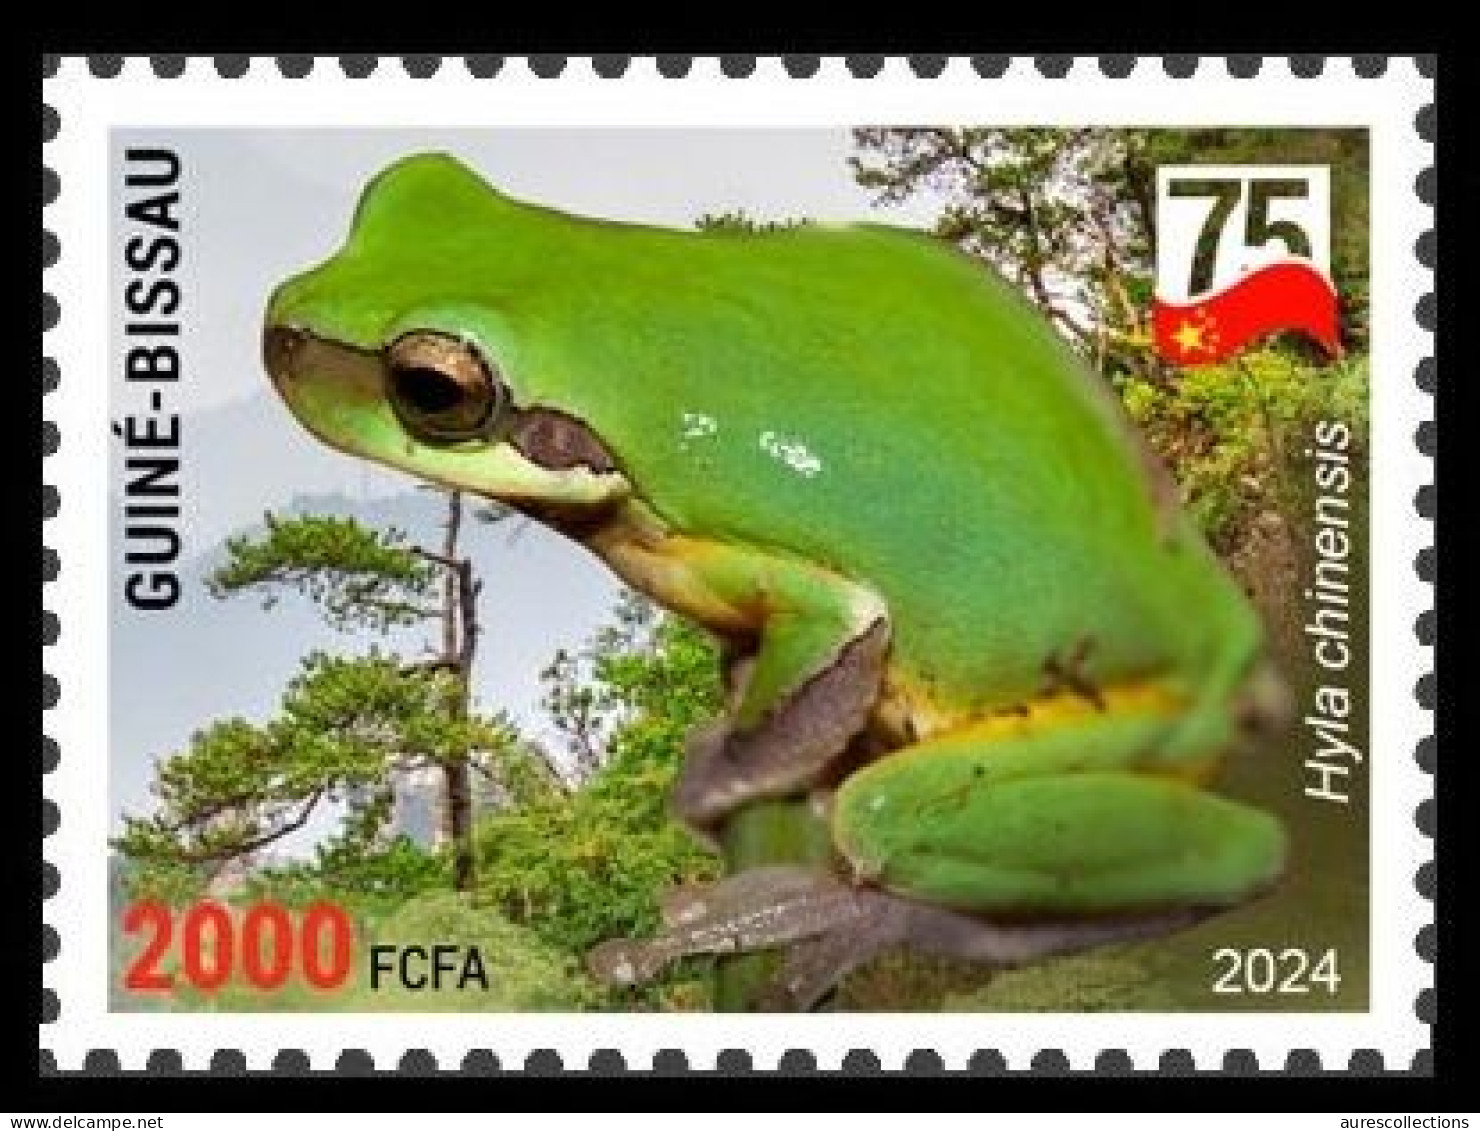 GUINEA BISSAU 2024 STAMP 1V - CHINA AMPHIBIANS & REPTILES - CHINESE TREE FROG FROGS GRENOUILLES - CHINA 75 ANNIV. - MNH - Ranas